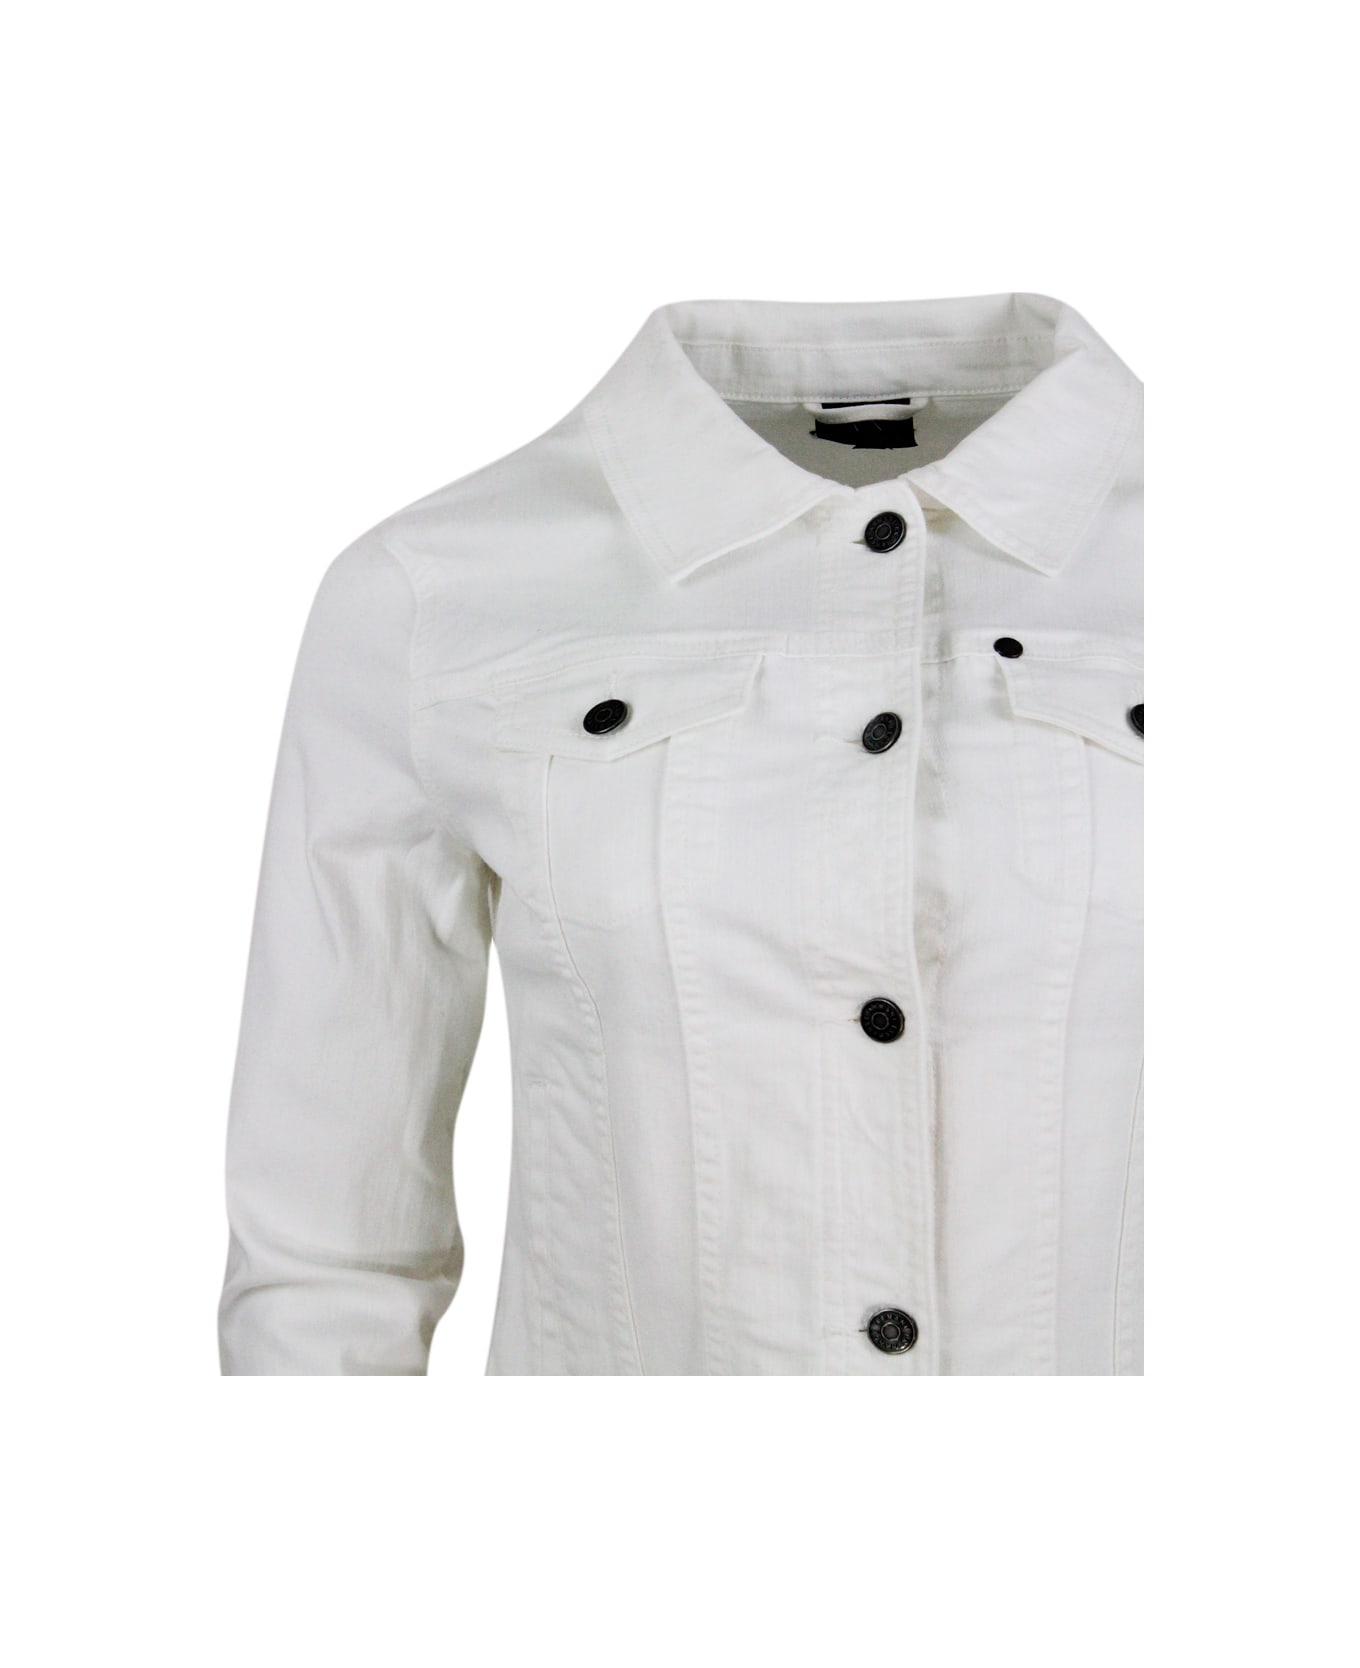 Armani Collezioni Denim Jacket With Patch Pockets On The Chest, Side Welt Pockets And Button Closure - White